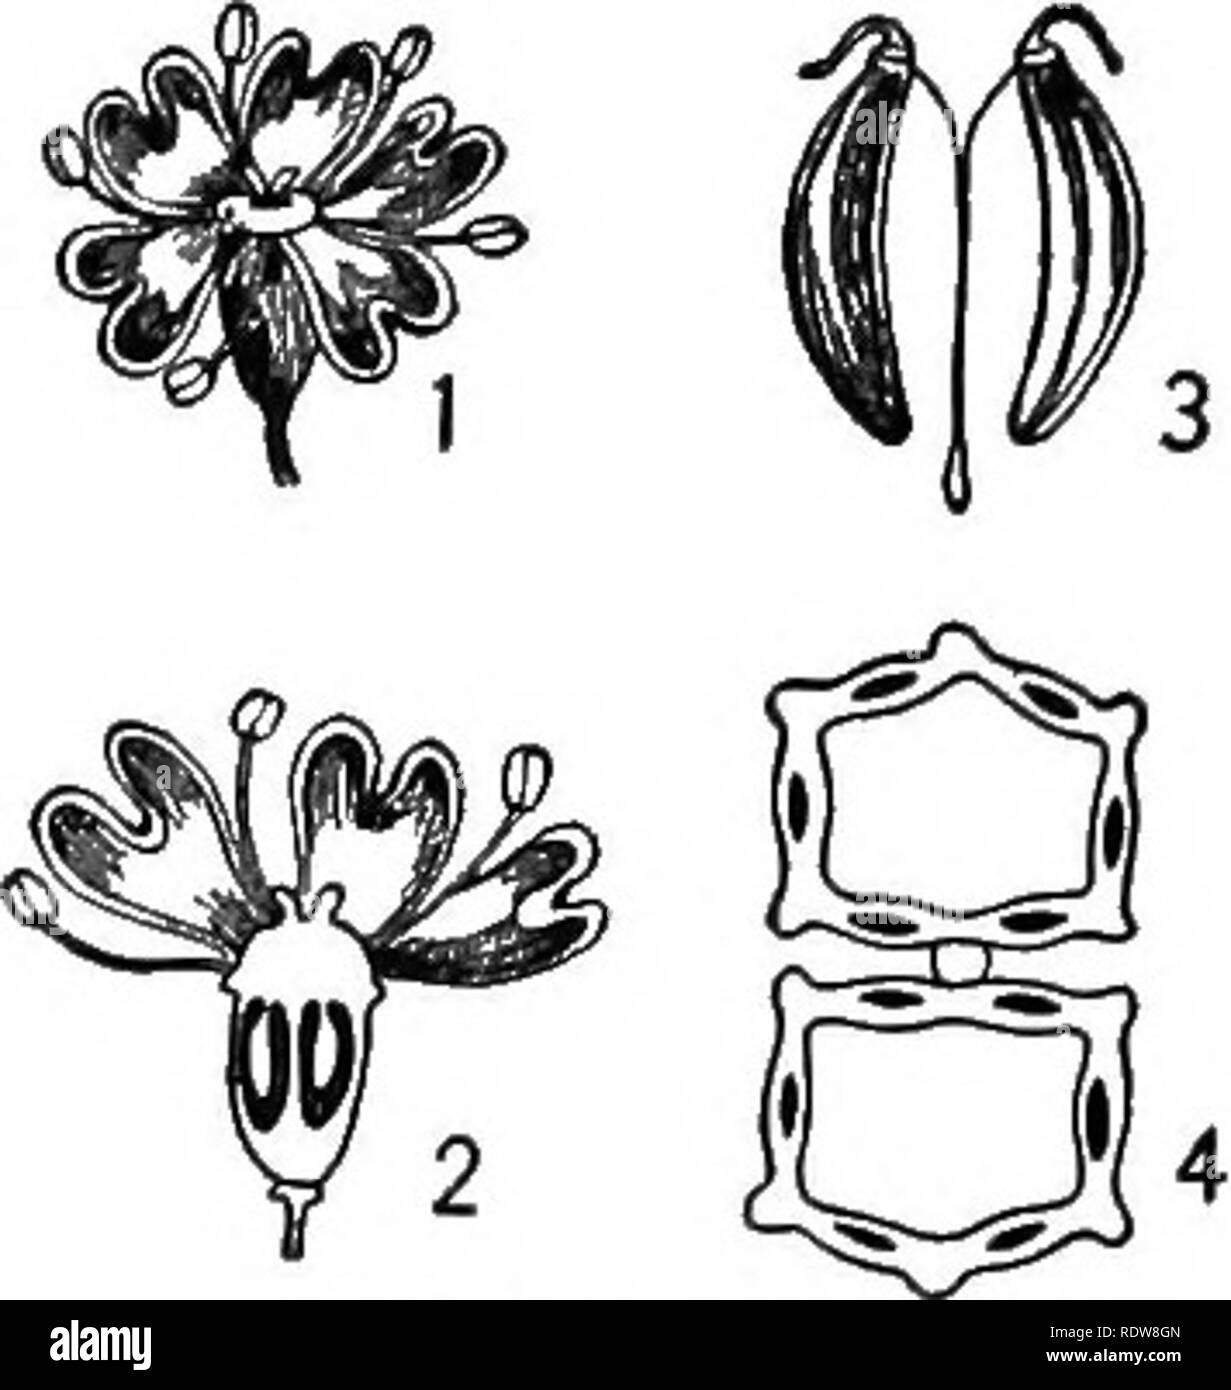 . Introduction to botany. Botany. Dicotyledones. 83 disk crowning the ovary. Fruit consisting of 2 seedlil&lt;e carpels, each of which bears 5 primary ribs, and often 4 intermediate ones. Longi- tudinal oil tubes commonly occur in the tissue of the carpels between the ribs; these are best seen in cross sections of the carpels. I. HERACLEUM. Cow Parsnip. (Named for Herakles, Greek form of Hercules.) Tall, stout, and often pubescent perennials, with large, ternately compound leaves and broad, compound umbels of white flowers. Involucre of the general umbel deciduous or none; bracts of the involu Stock Photo